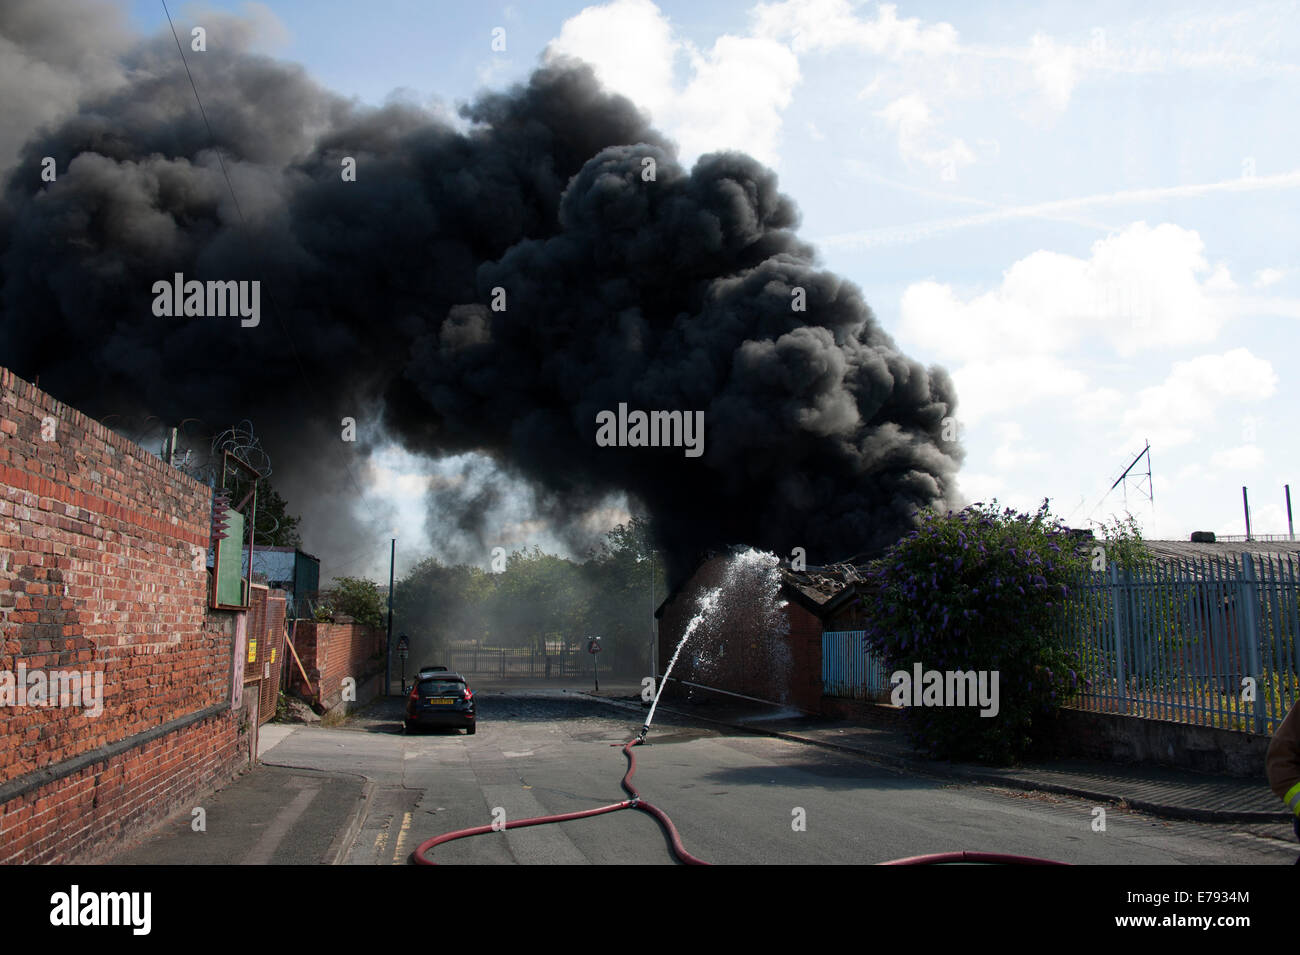 Thick Black Smoke Pollution Carbon Fire Hose Water Stock Photo